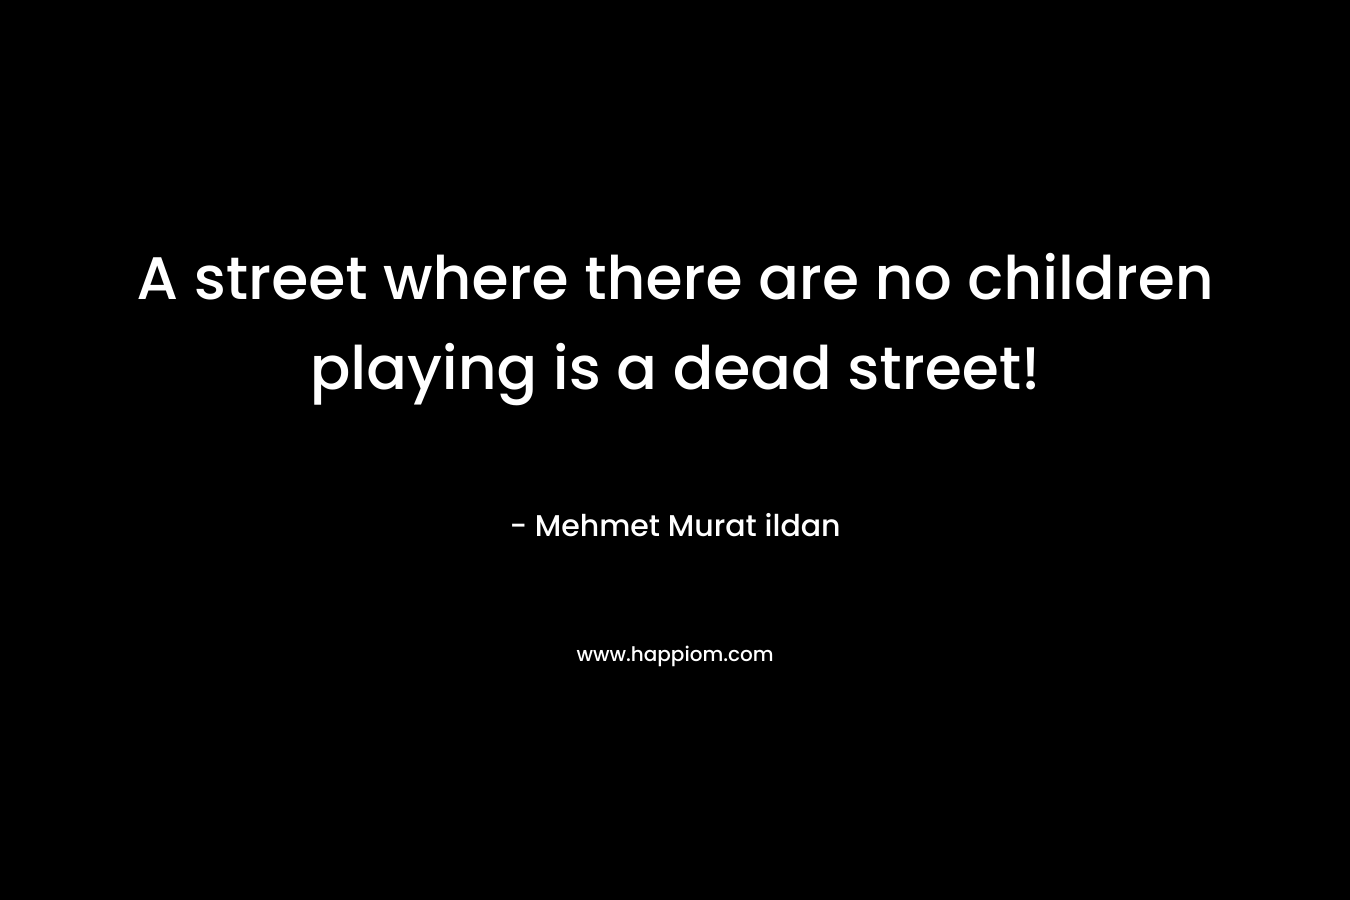 A street where there are no children playing is a dead street!